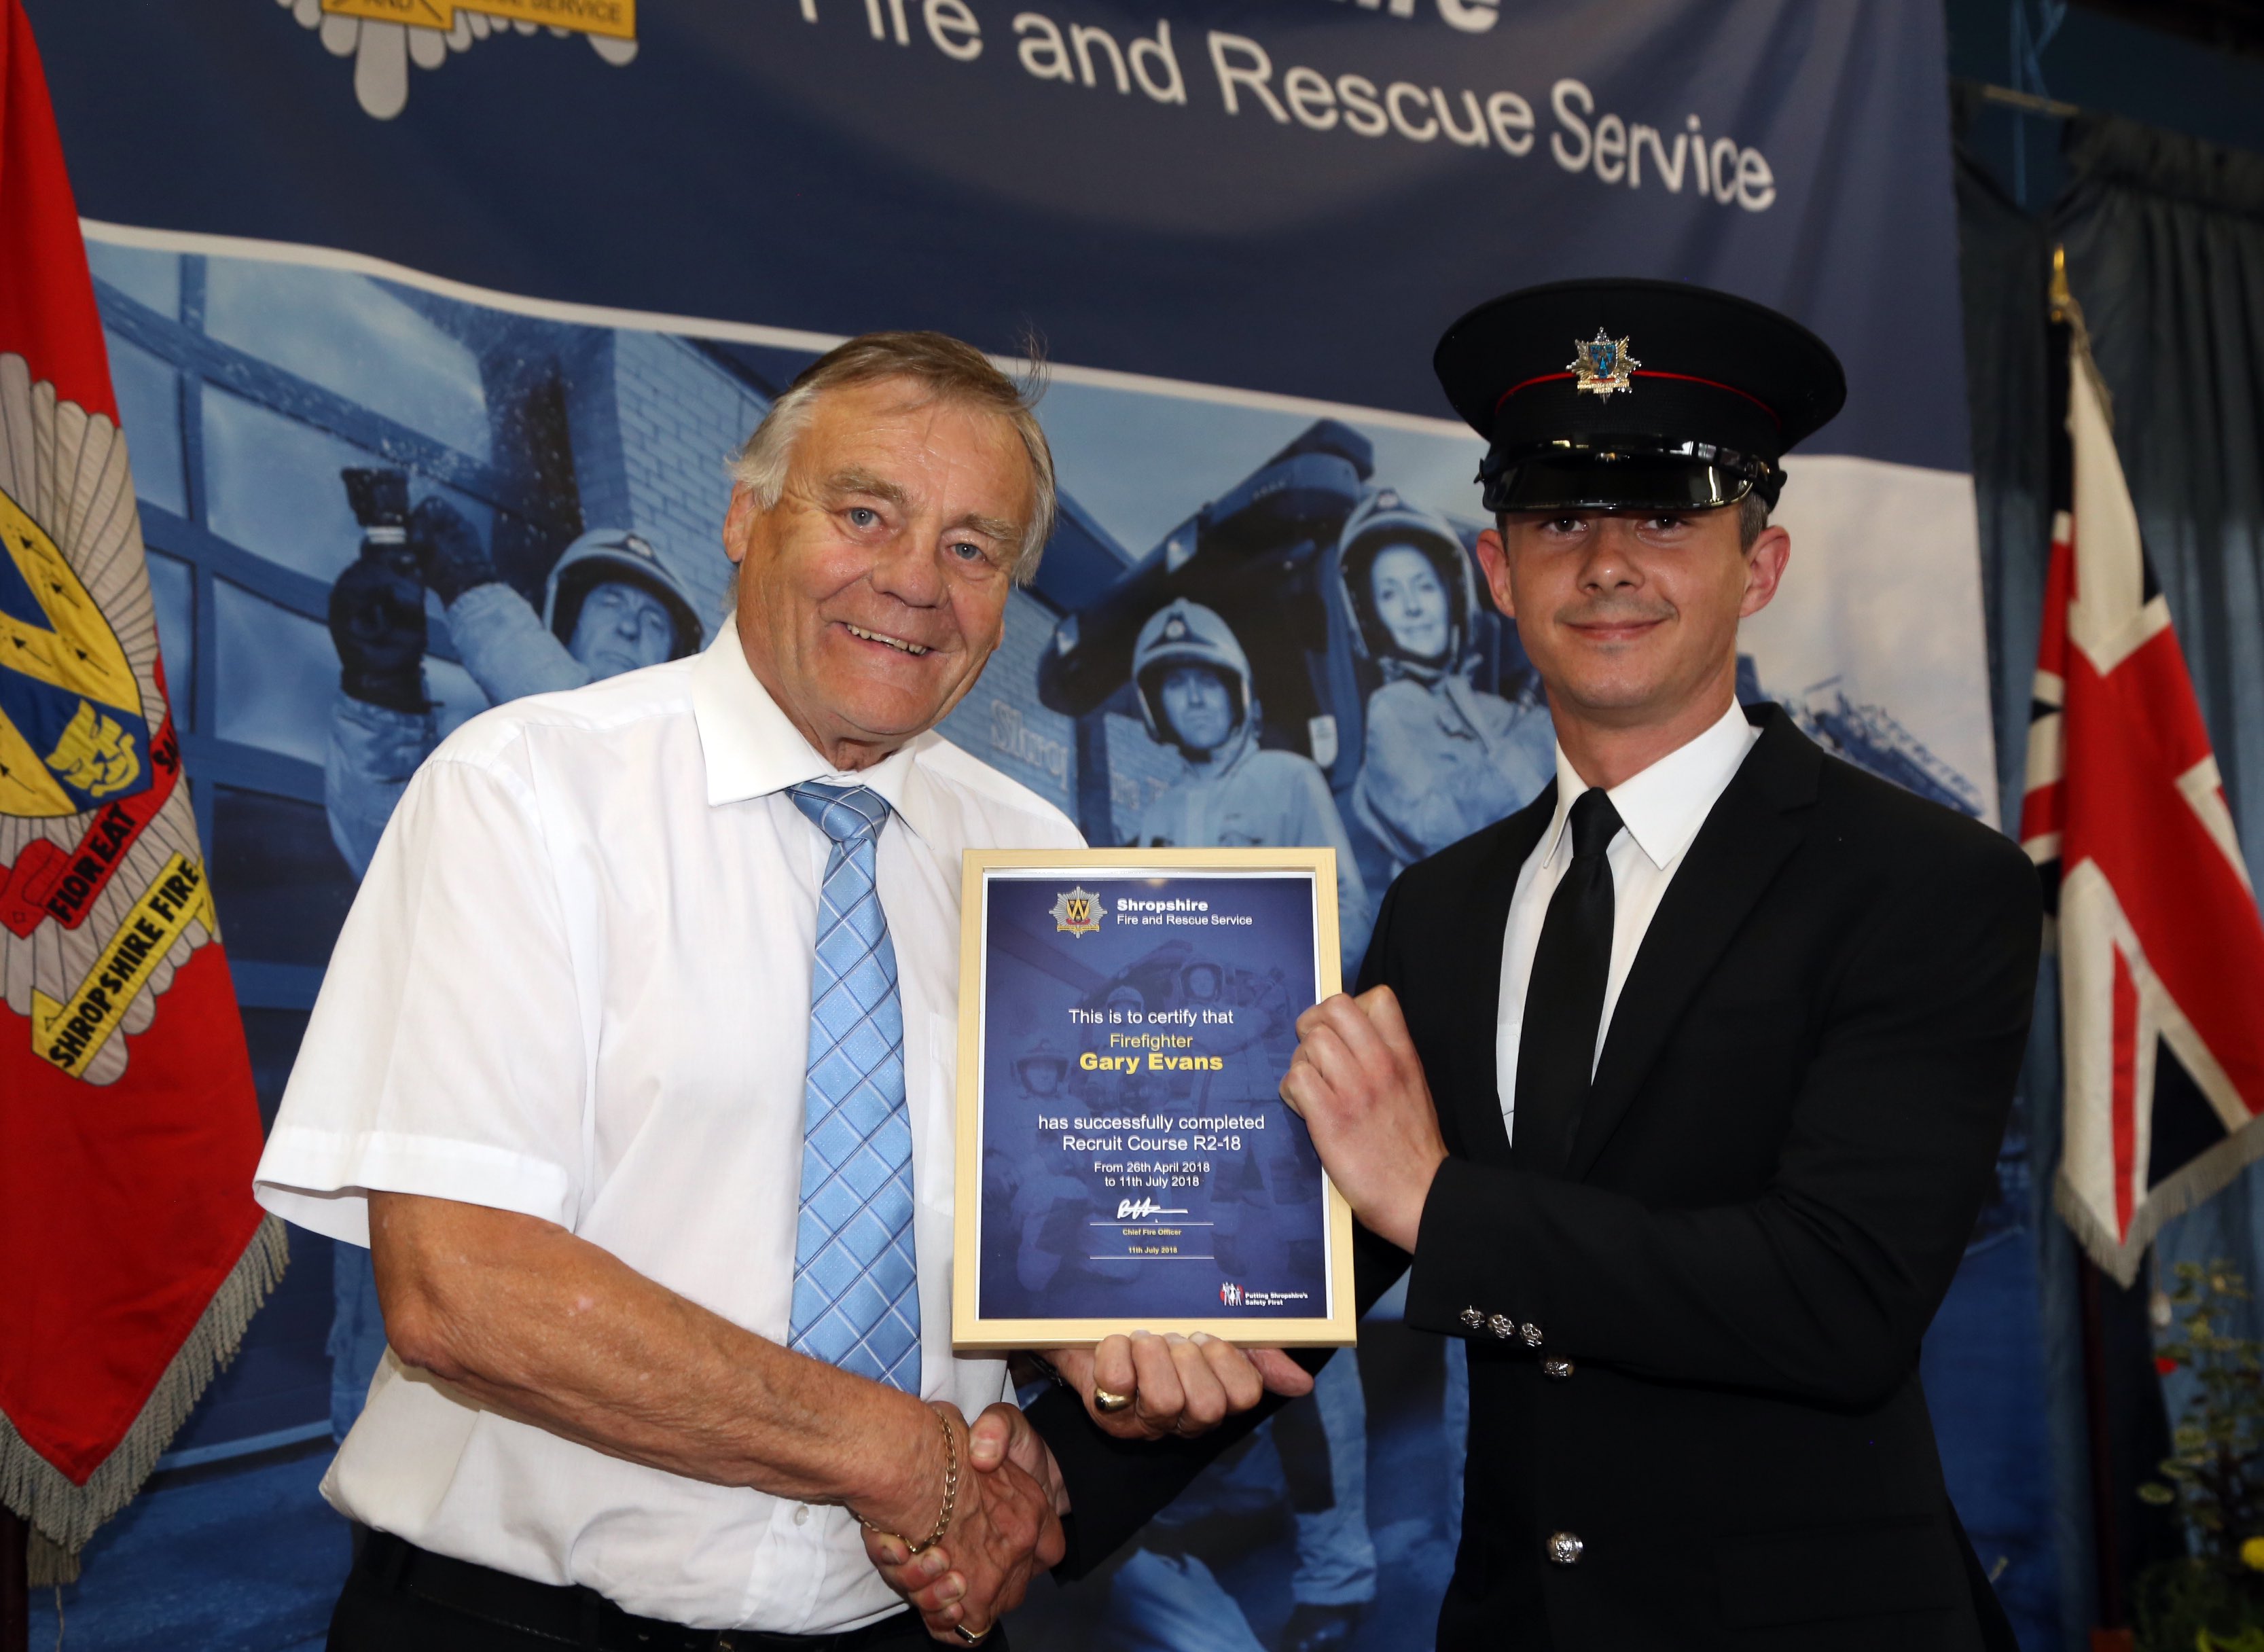 Shropshire and Wrekin Fire Authority chairman, Councillor Eric Carter, presents recruitment certificates to firefighters. Gary Evans also won the instructors' award